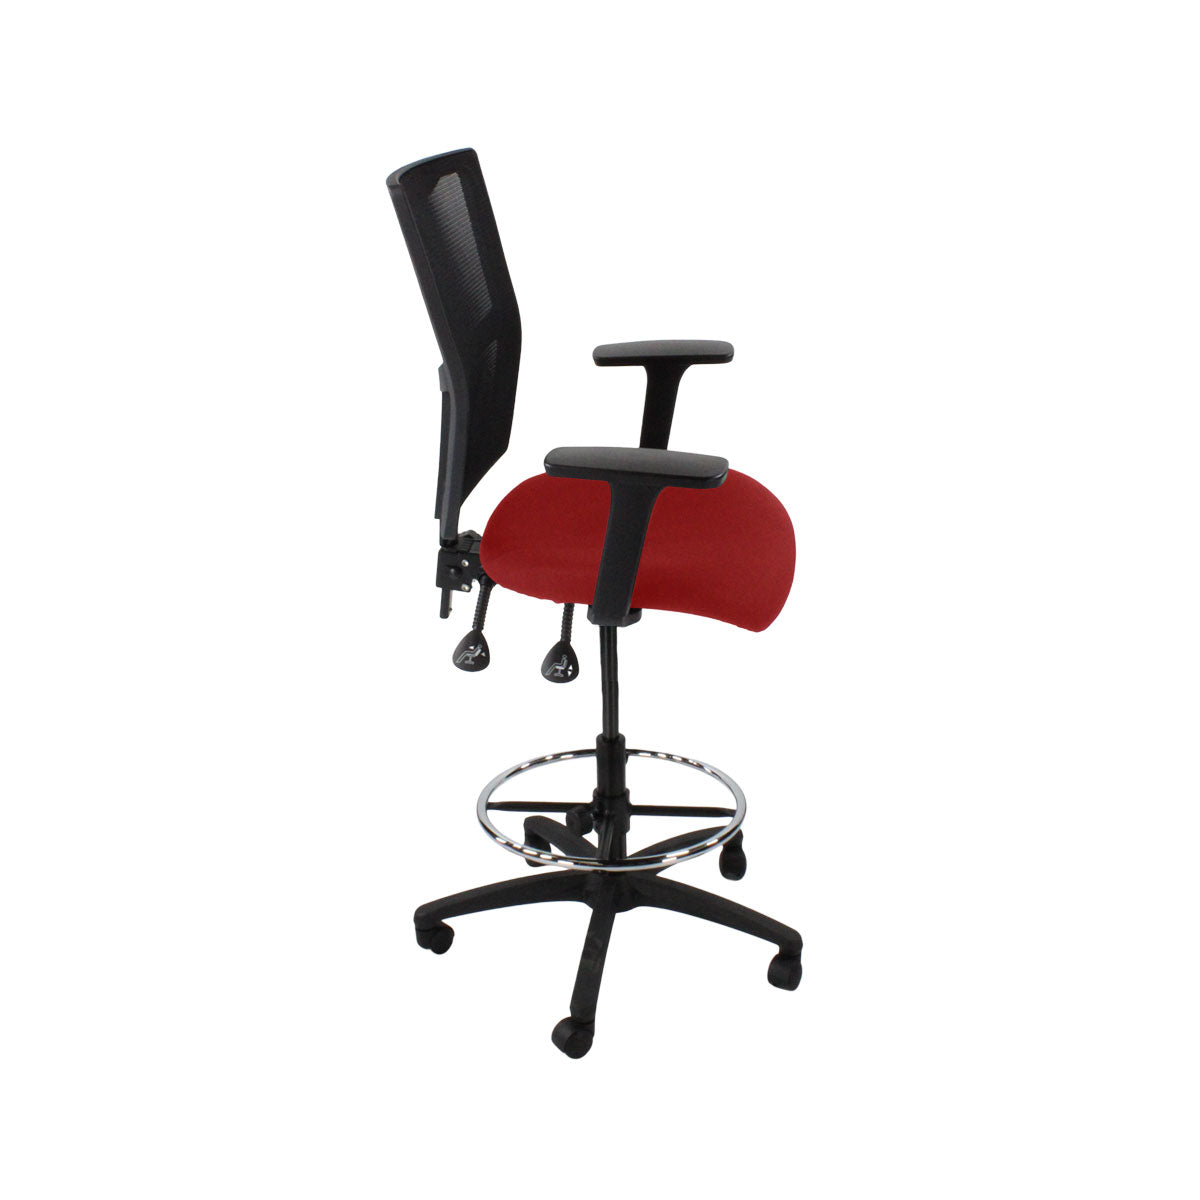 TOC: Ergo 2 Draughtsman Chair in Red Fabric - Refurbished